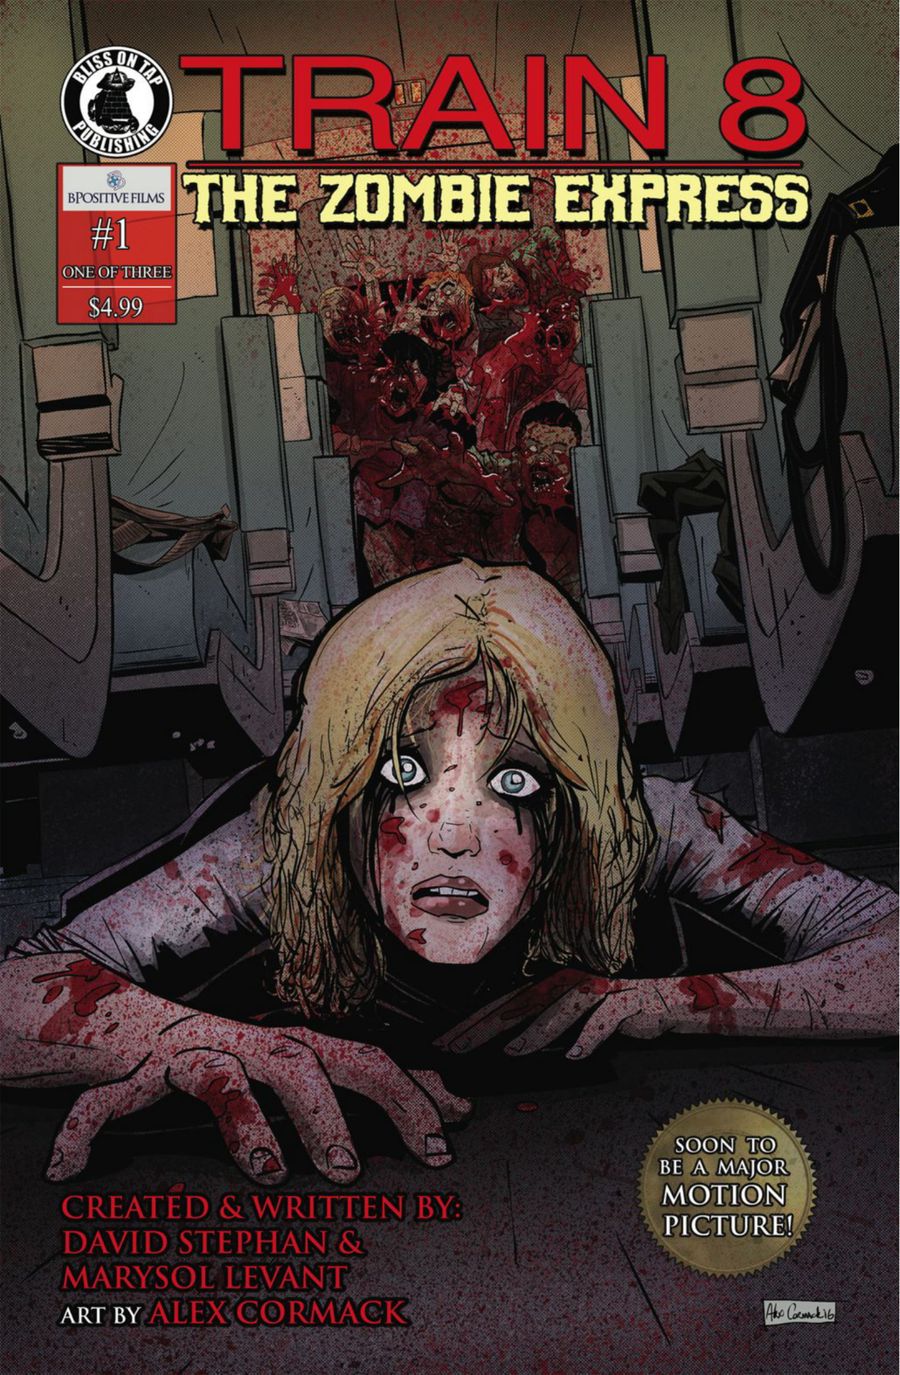 Bliss on Tap | Train 8: The Zombie Express #1 page 1 | Spinwhiz Comics